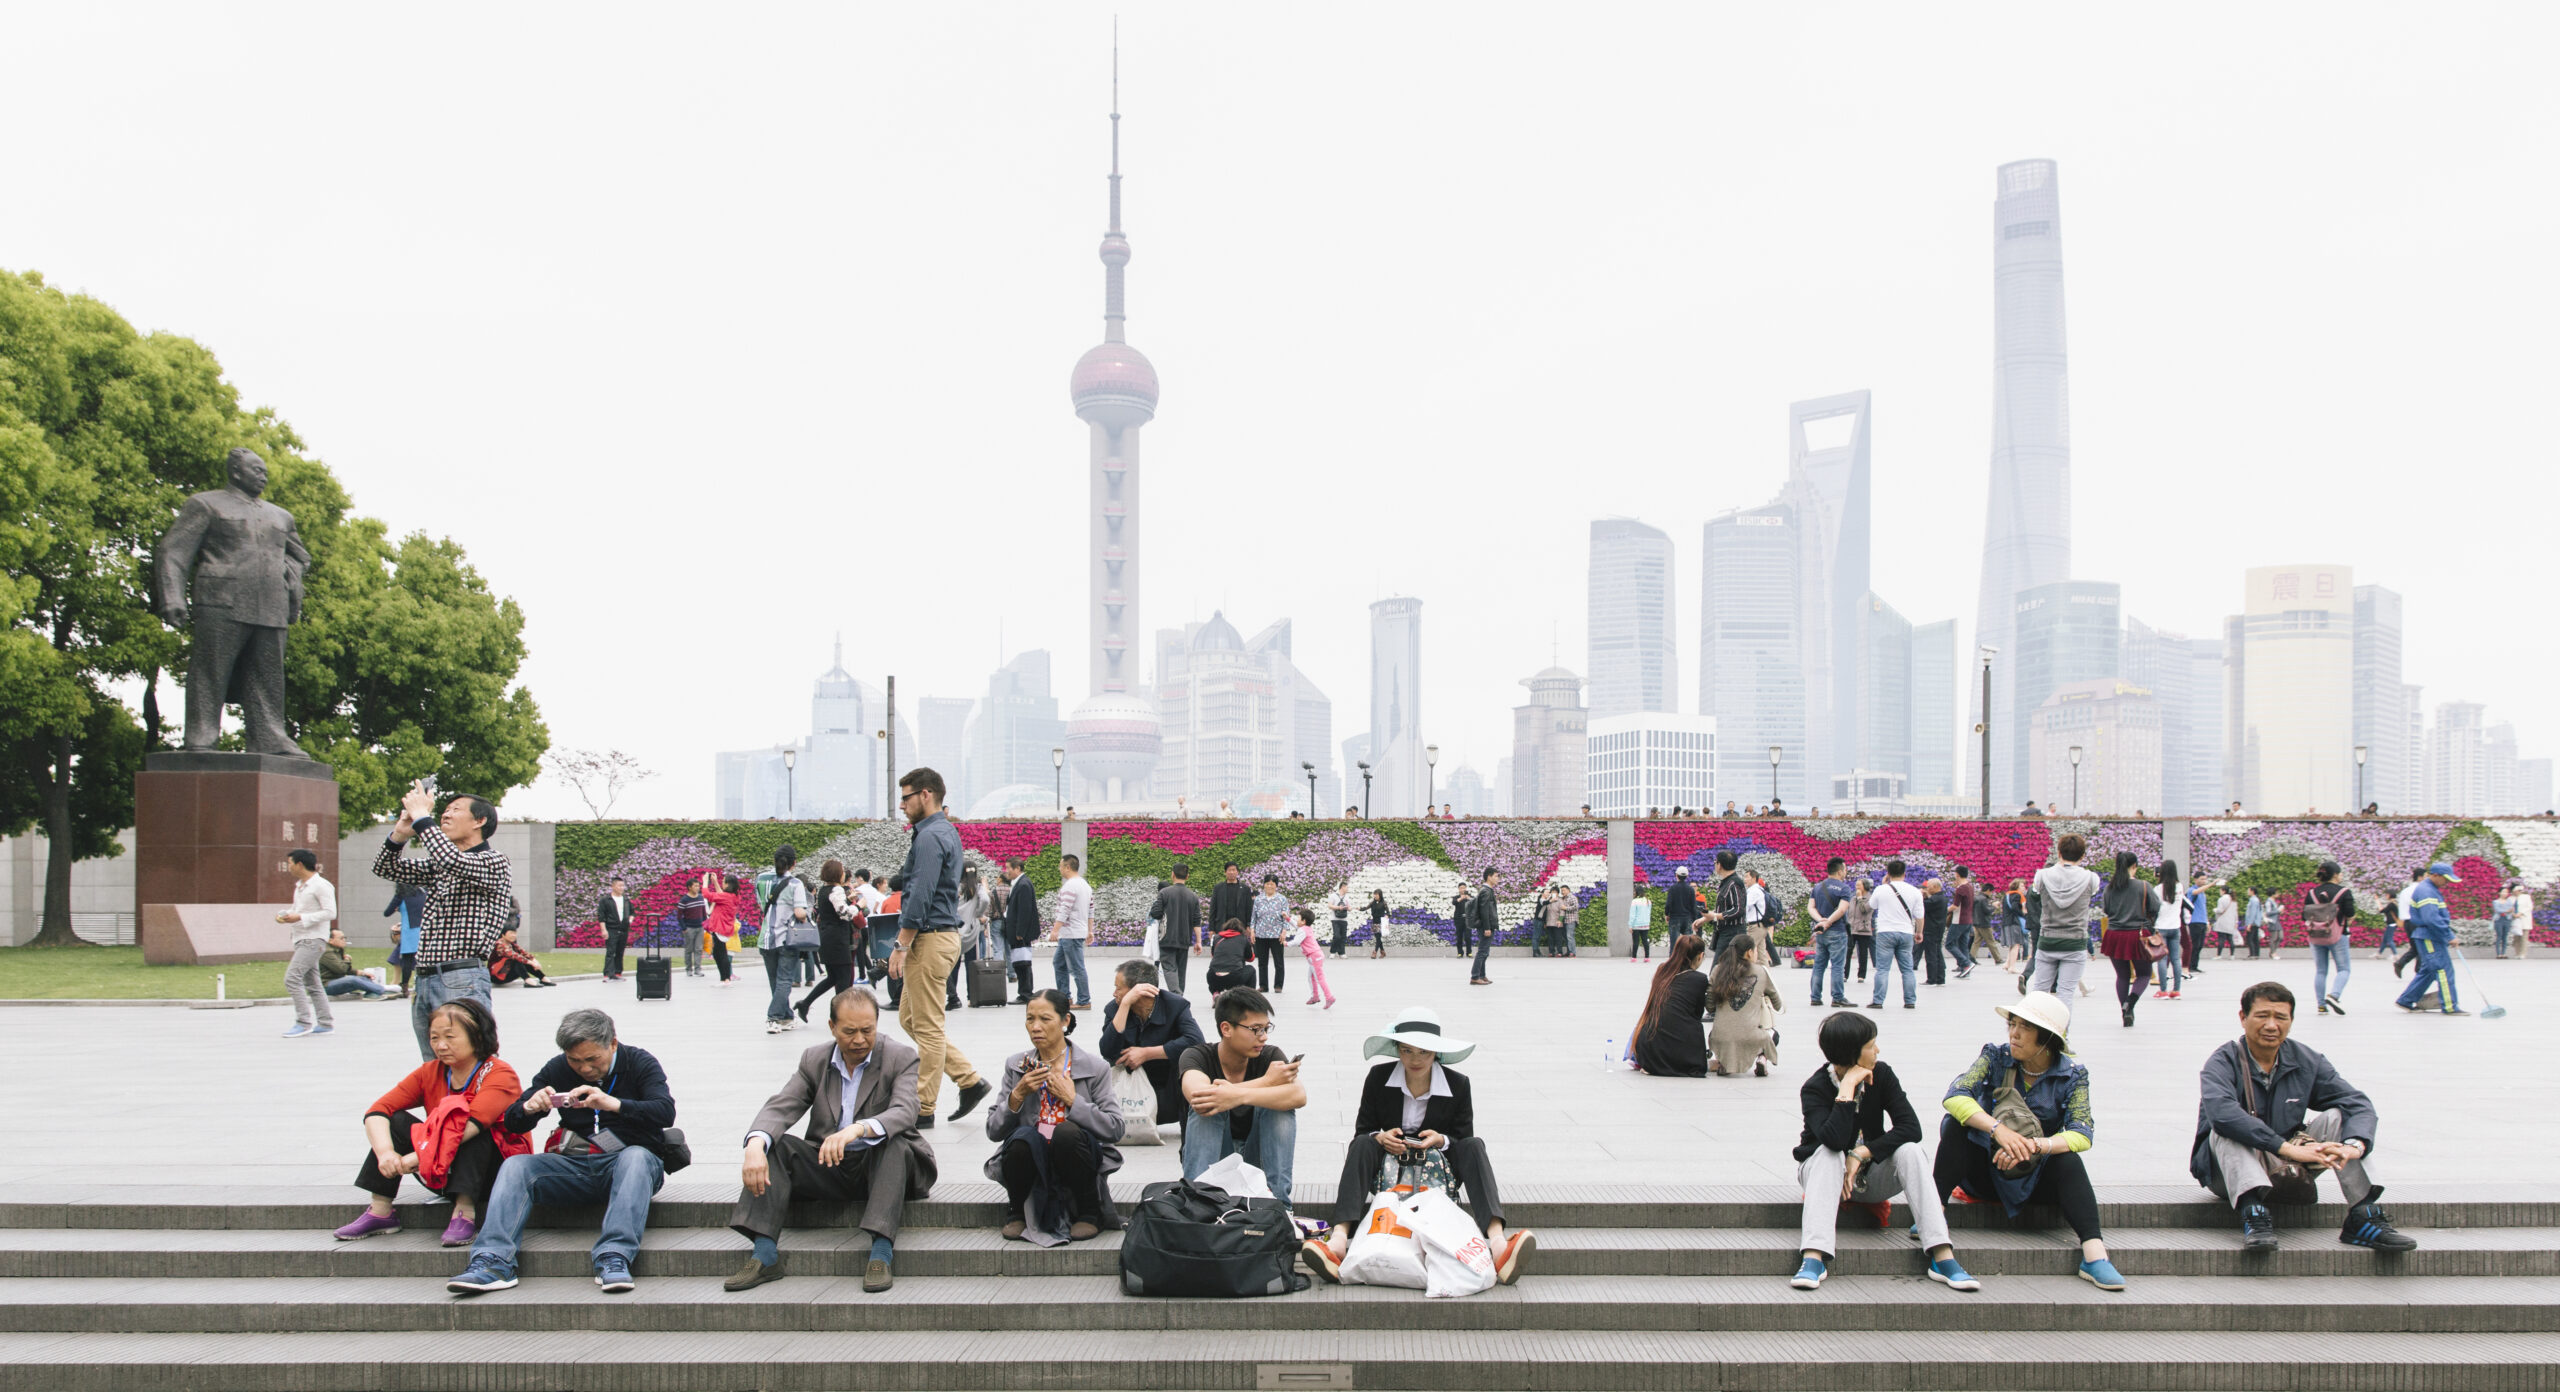 People sitting and relaxing in a public square with the Shanghai skyline in the distance.